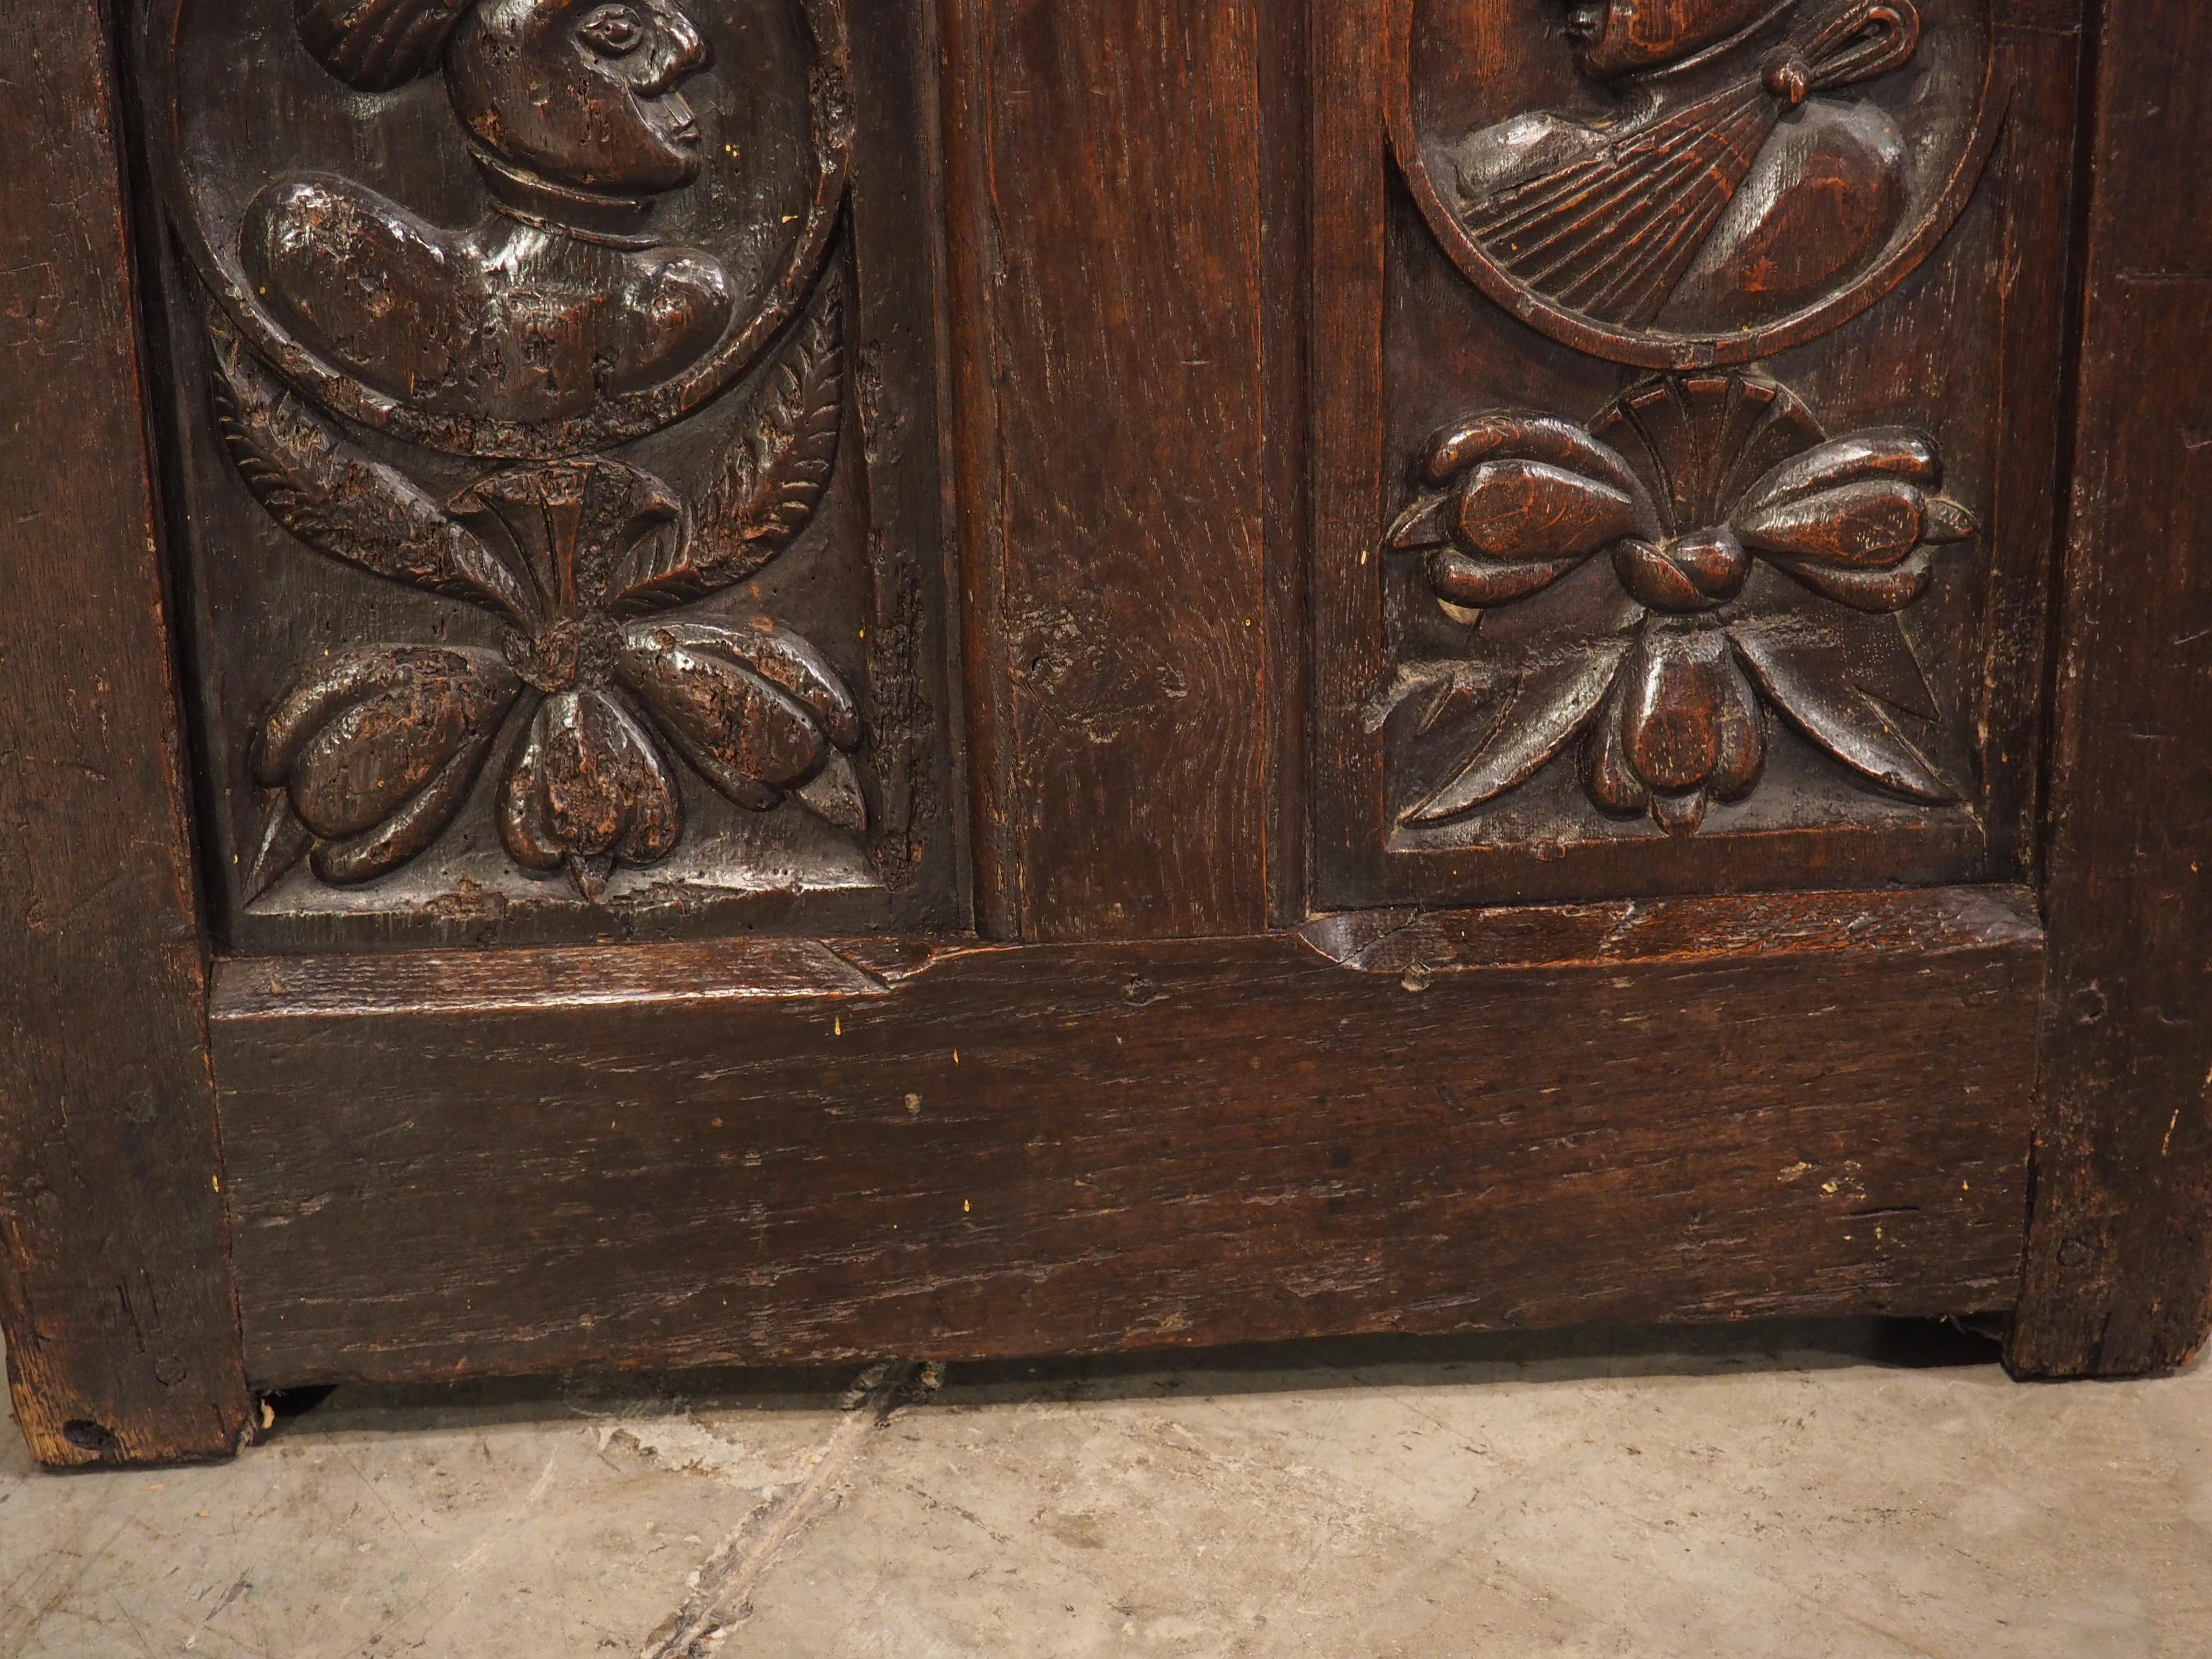 Whereas many pieces of furniture during the Italian Renaissance were heavily painted or inlaid with decorative motifs, French examples utilized hand-sculpted elements as the predominant form of ornamentation. A beautiful example of a French